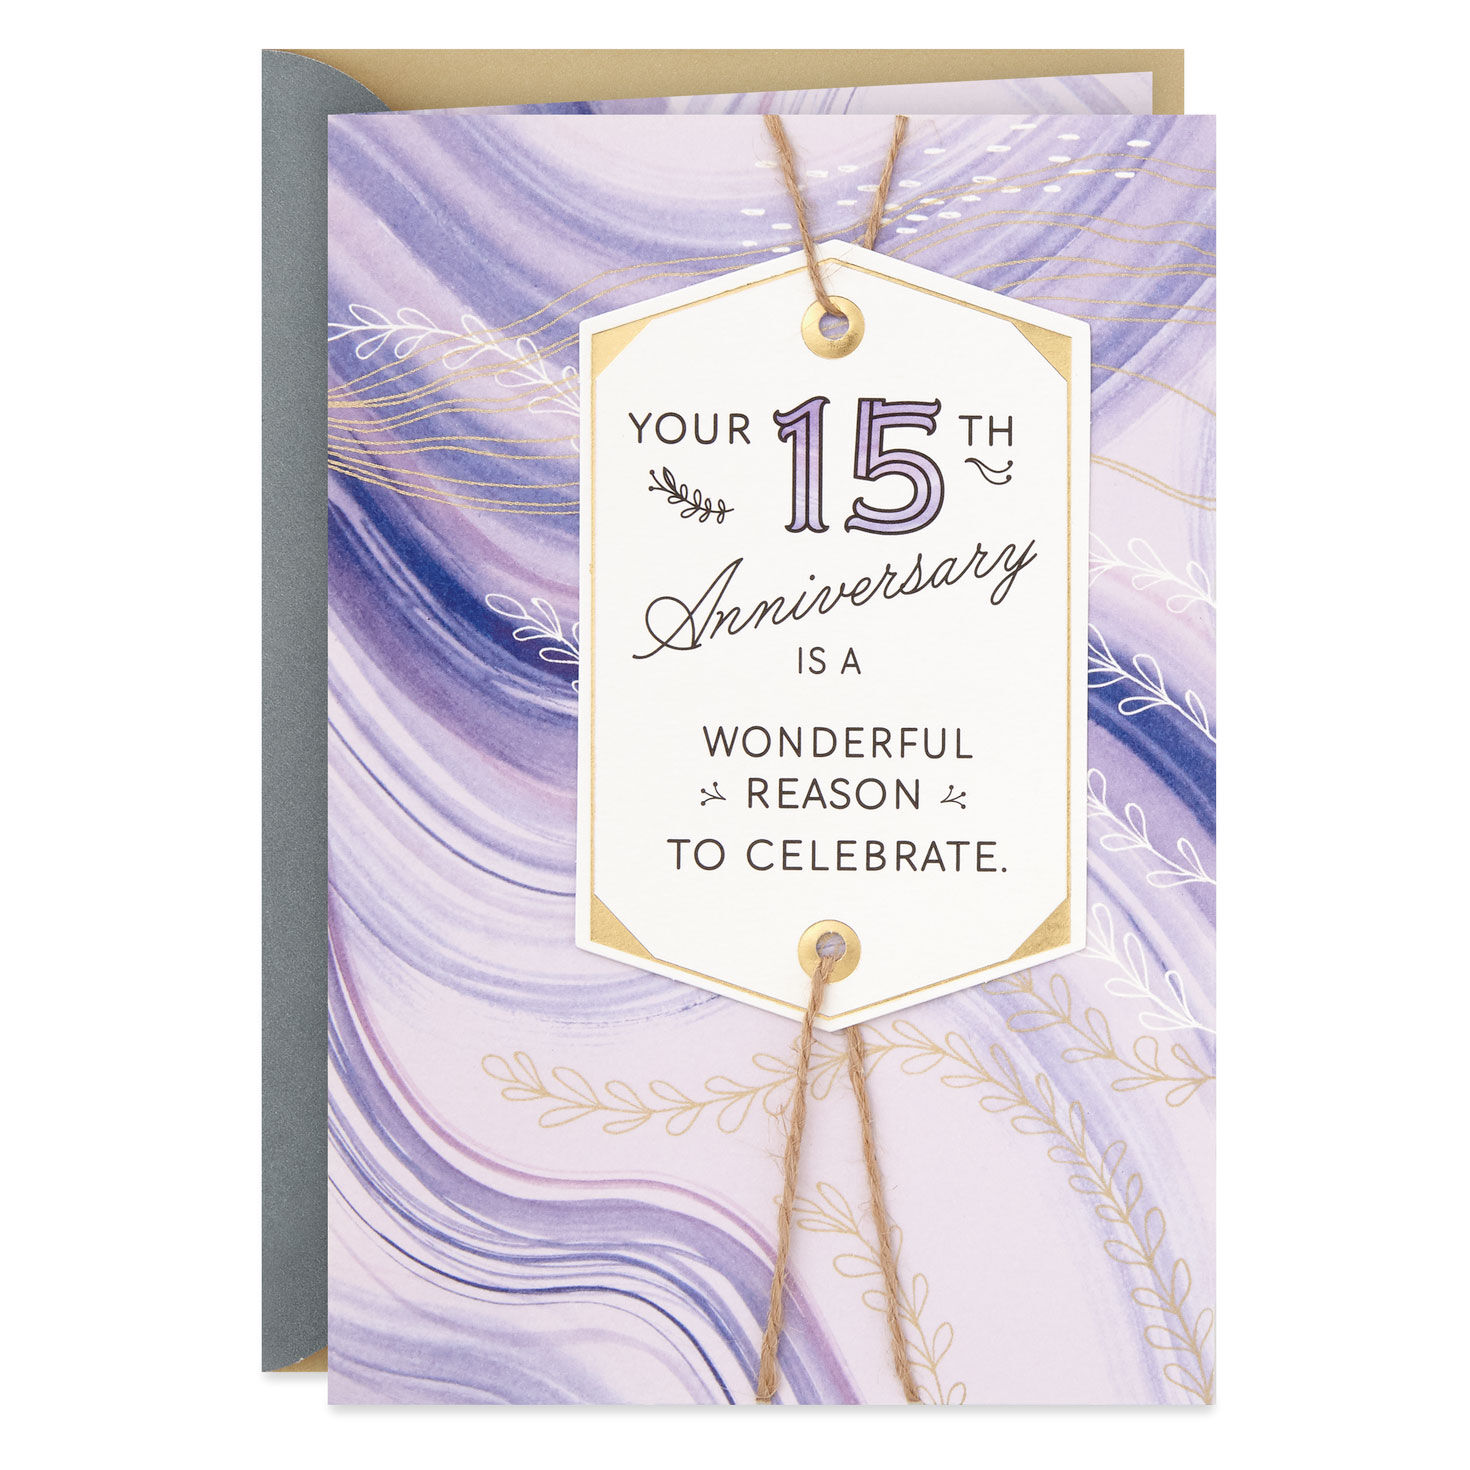 Cocktail Celebration UKG-624619 Beautiful Anniversary Card from The Indigo Blush Range Greeting Card for Both of You Daughter and Son-in-Law Foil and Flitter Finish